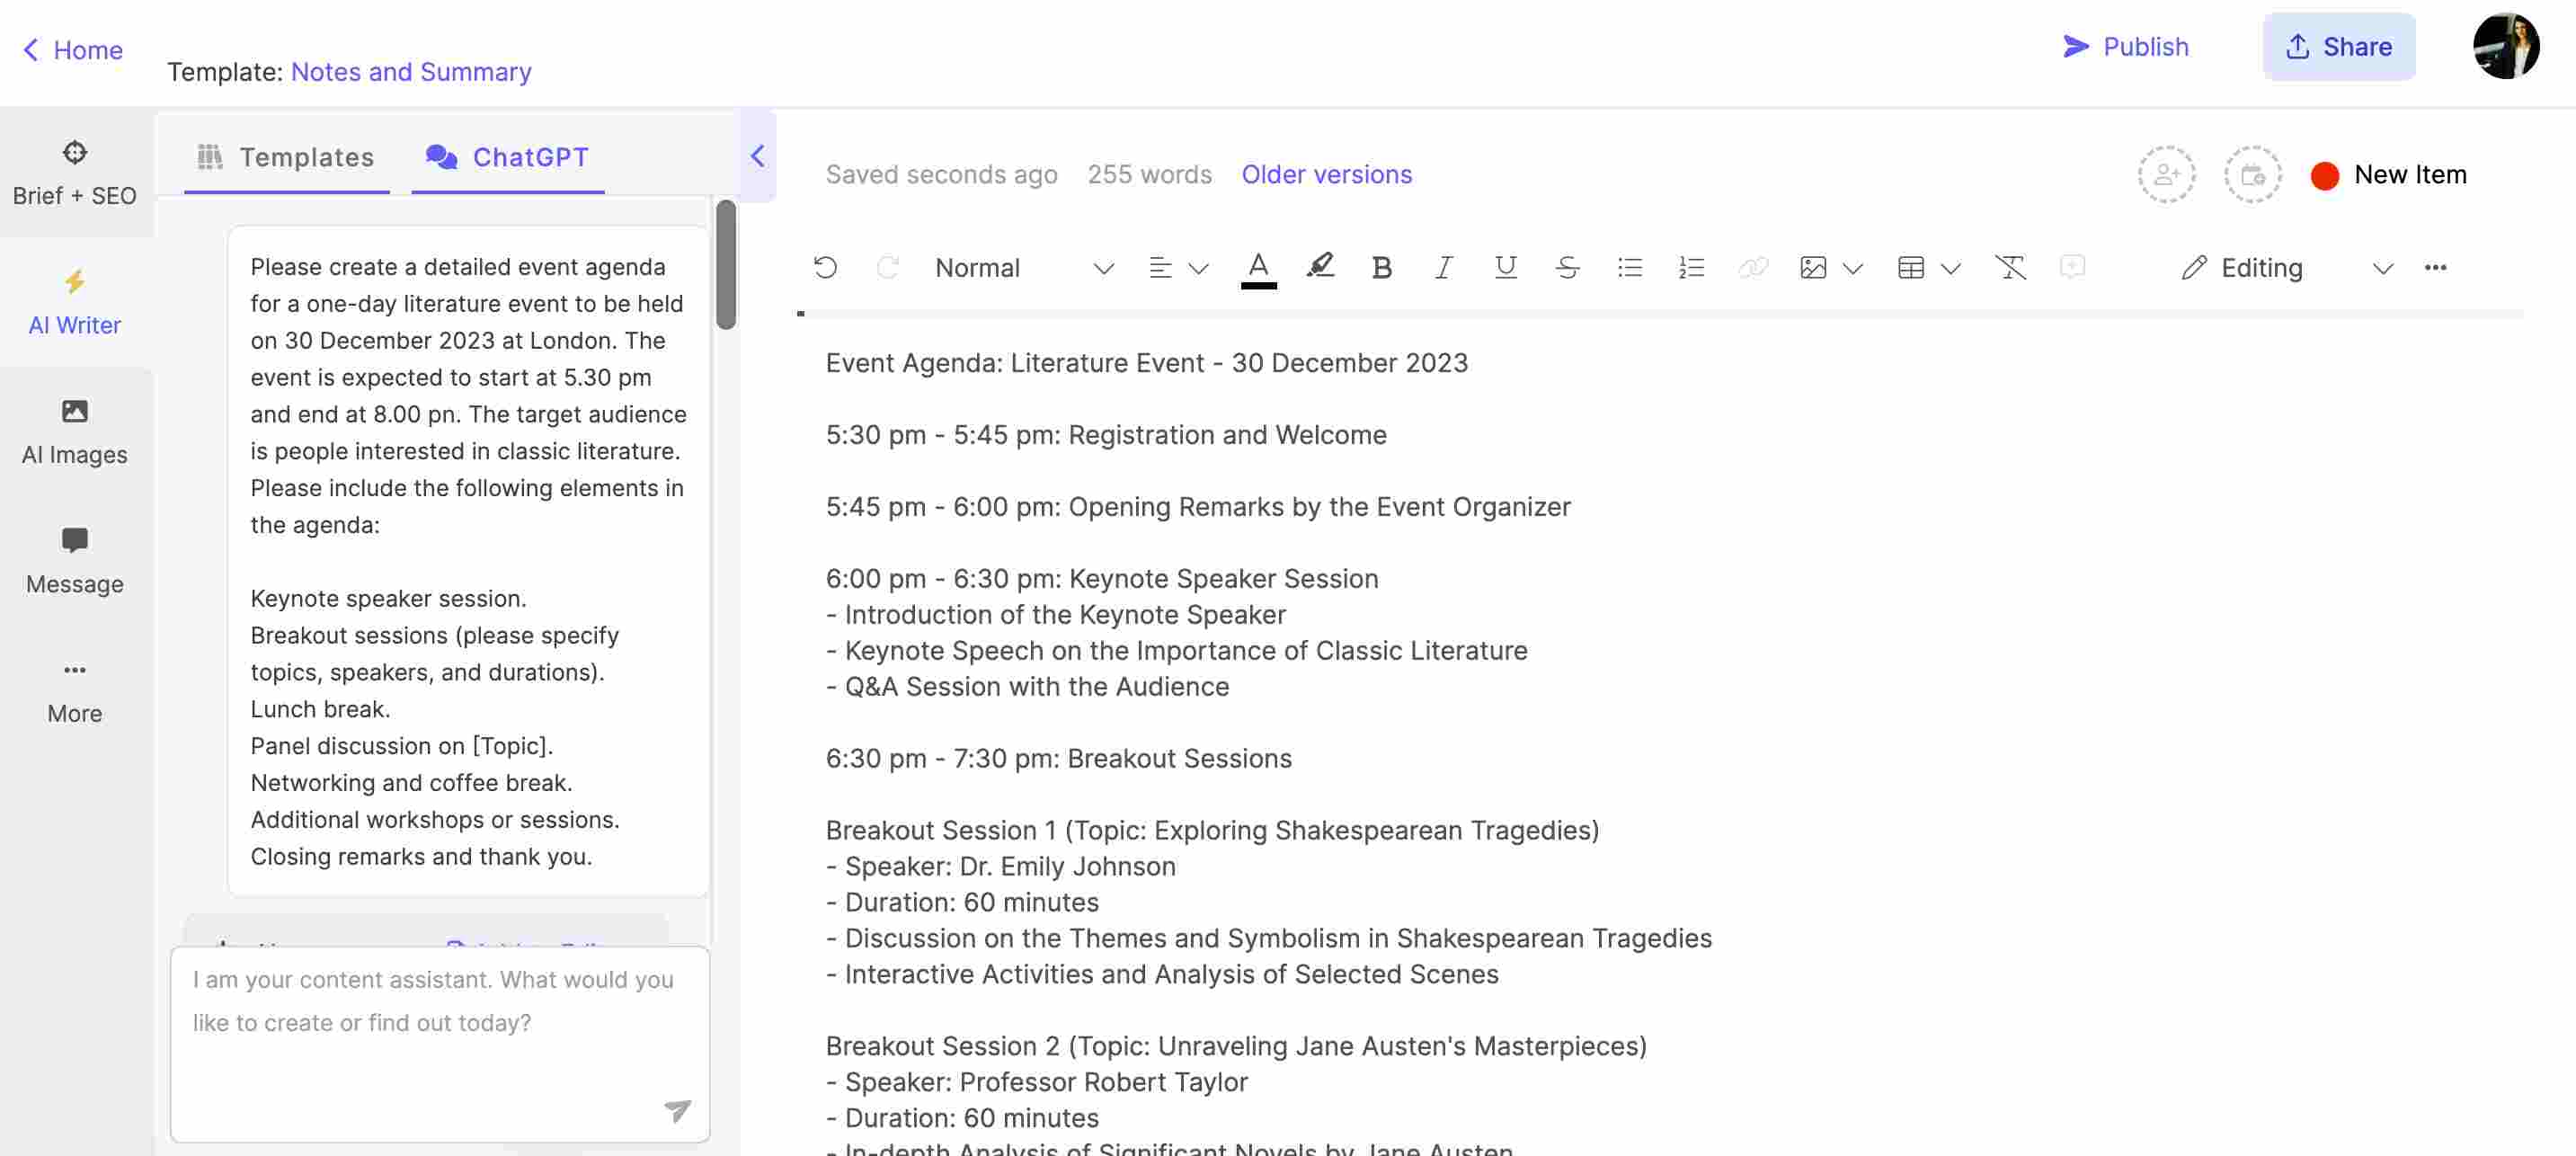 Using AI Chat for creating event agenda